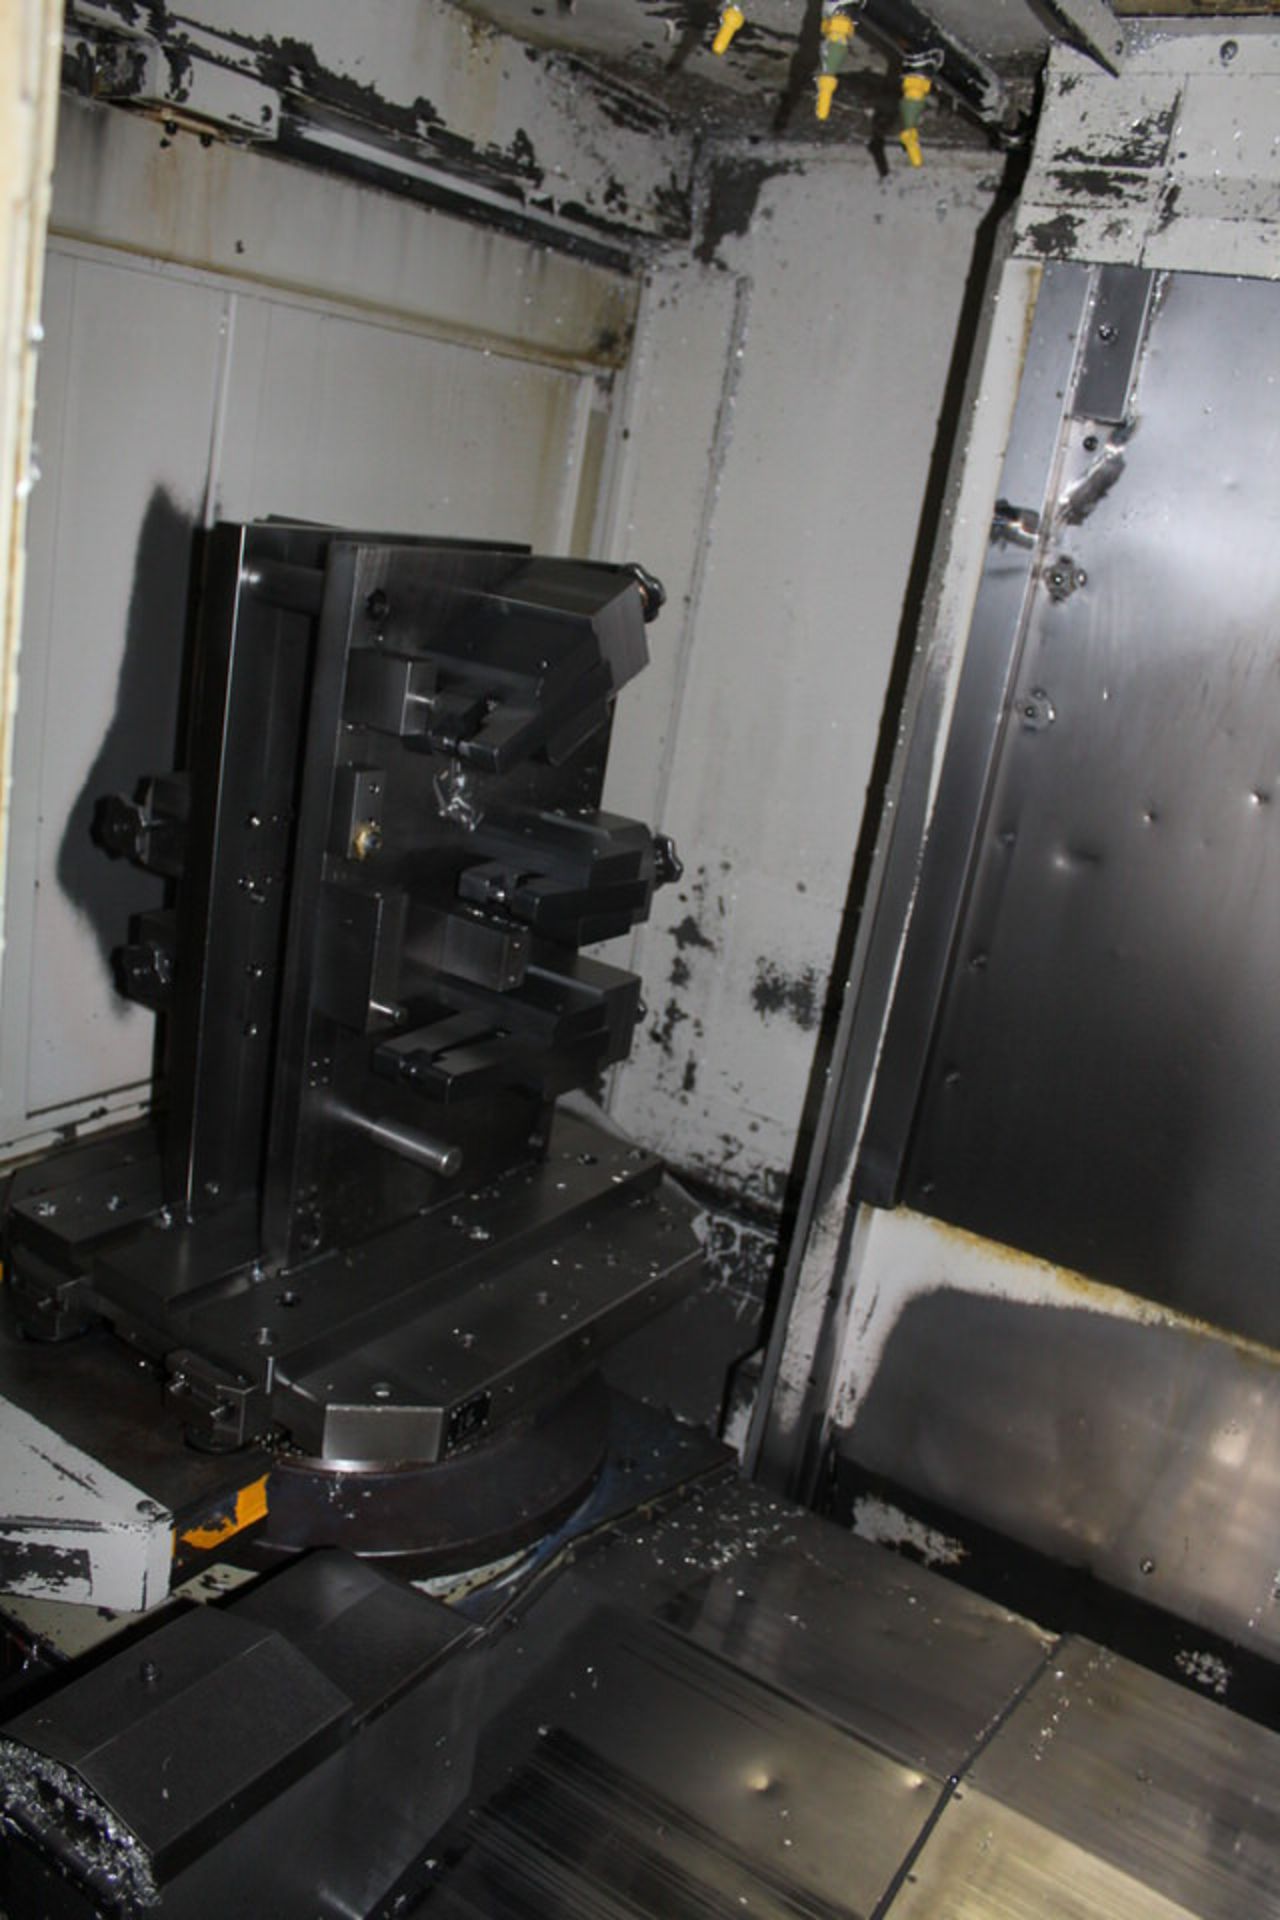 2000 MORI SEIKI MACHINE CELL, MDL:SH-503, SPINDLE SPEED: 12000 RPM, MAX TOOL DIA: 150MM - Image 2 of 8